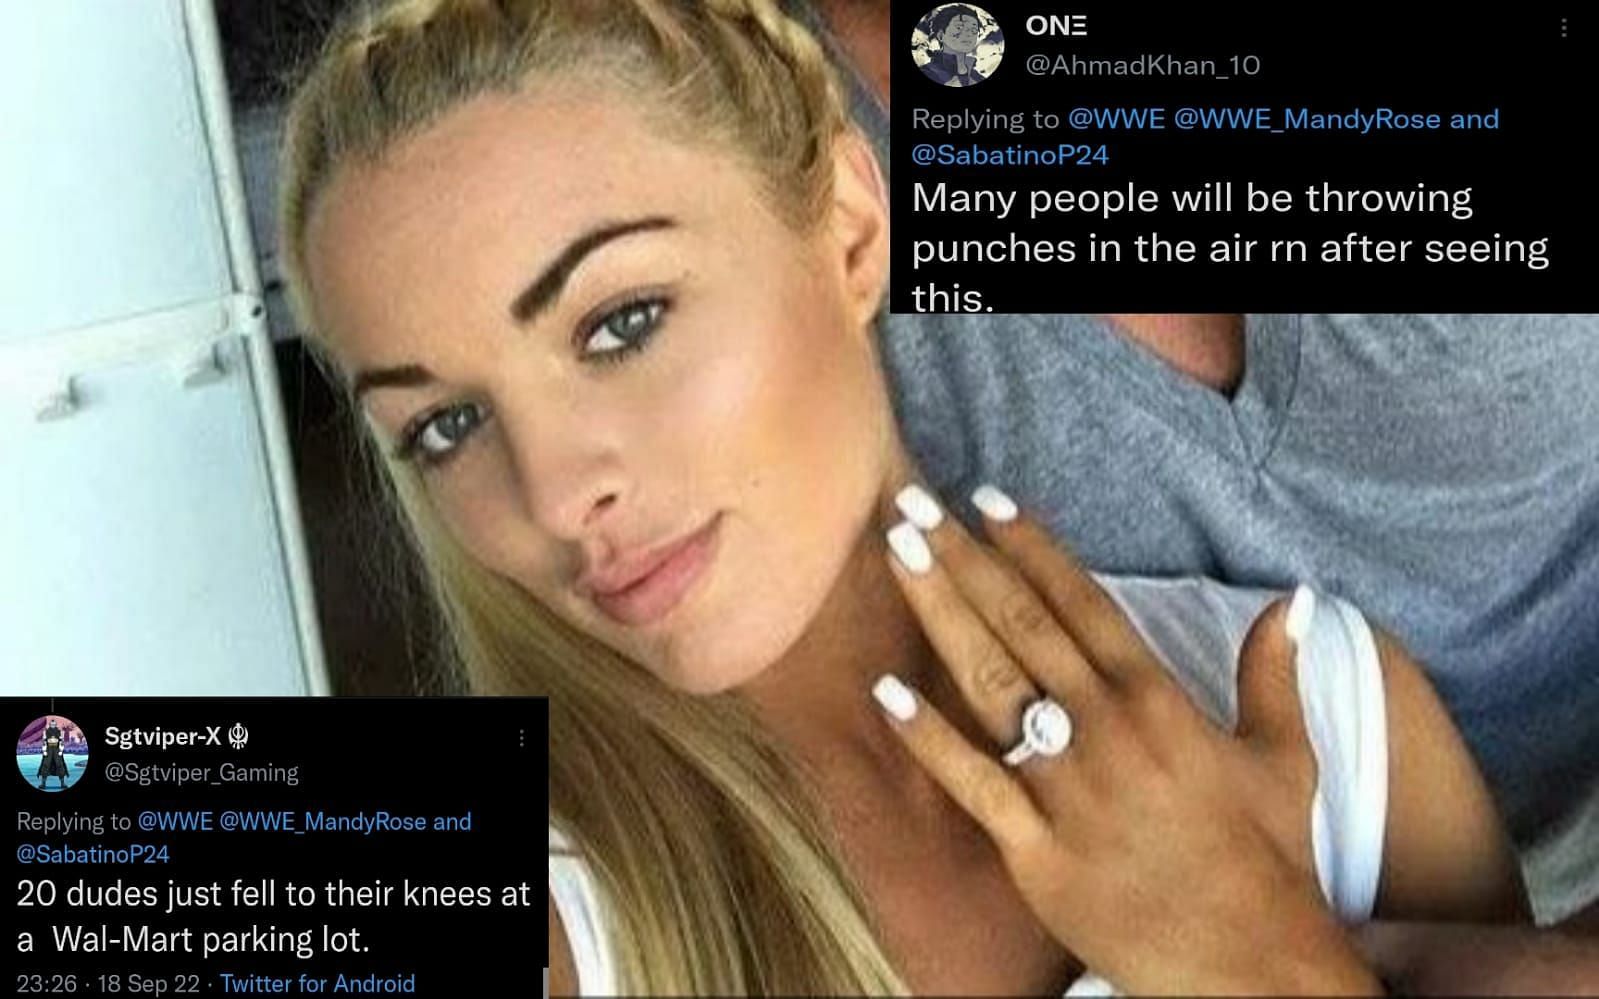 Mandy Rose recently got engaged to longterm boyfriend!